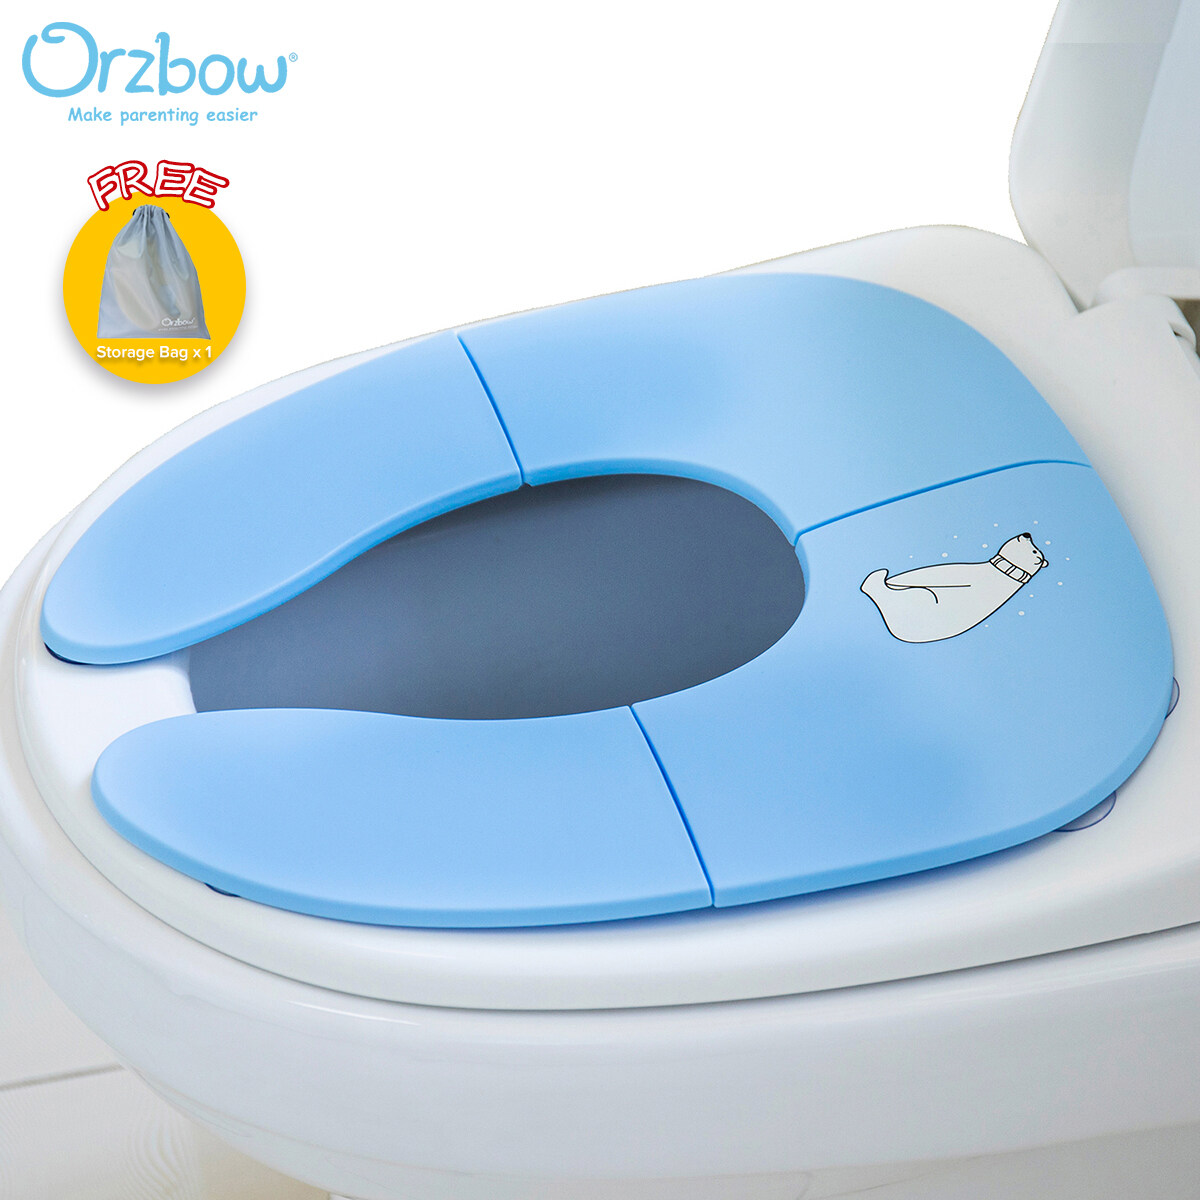 Folding Potty Training Seat for Toddlers Fits Most Toilets Travel Toilet Seat with Non Slip Pad Portable Toilet Seat for Boys and Girls 